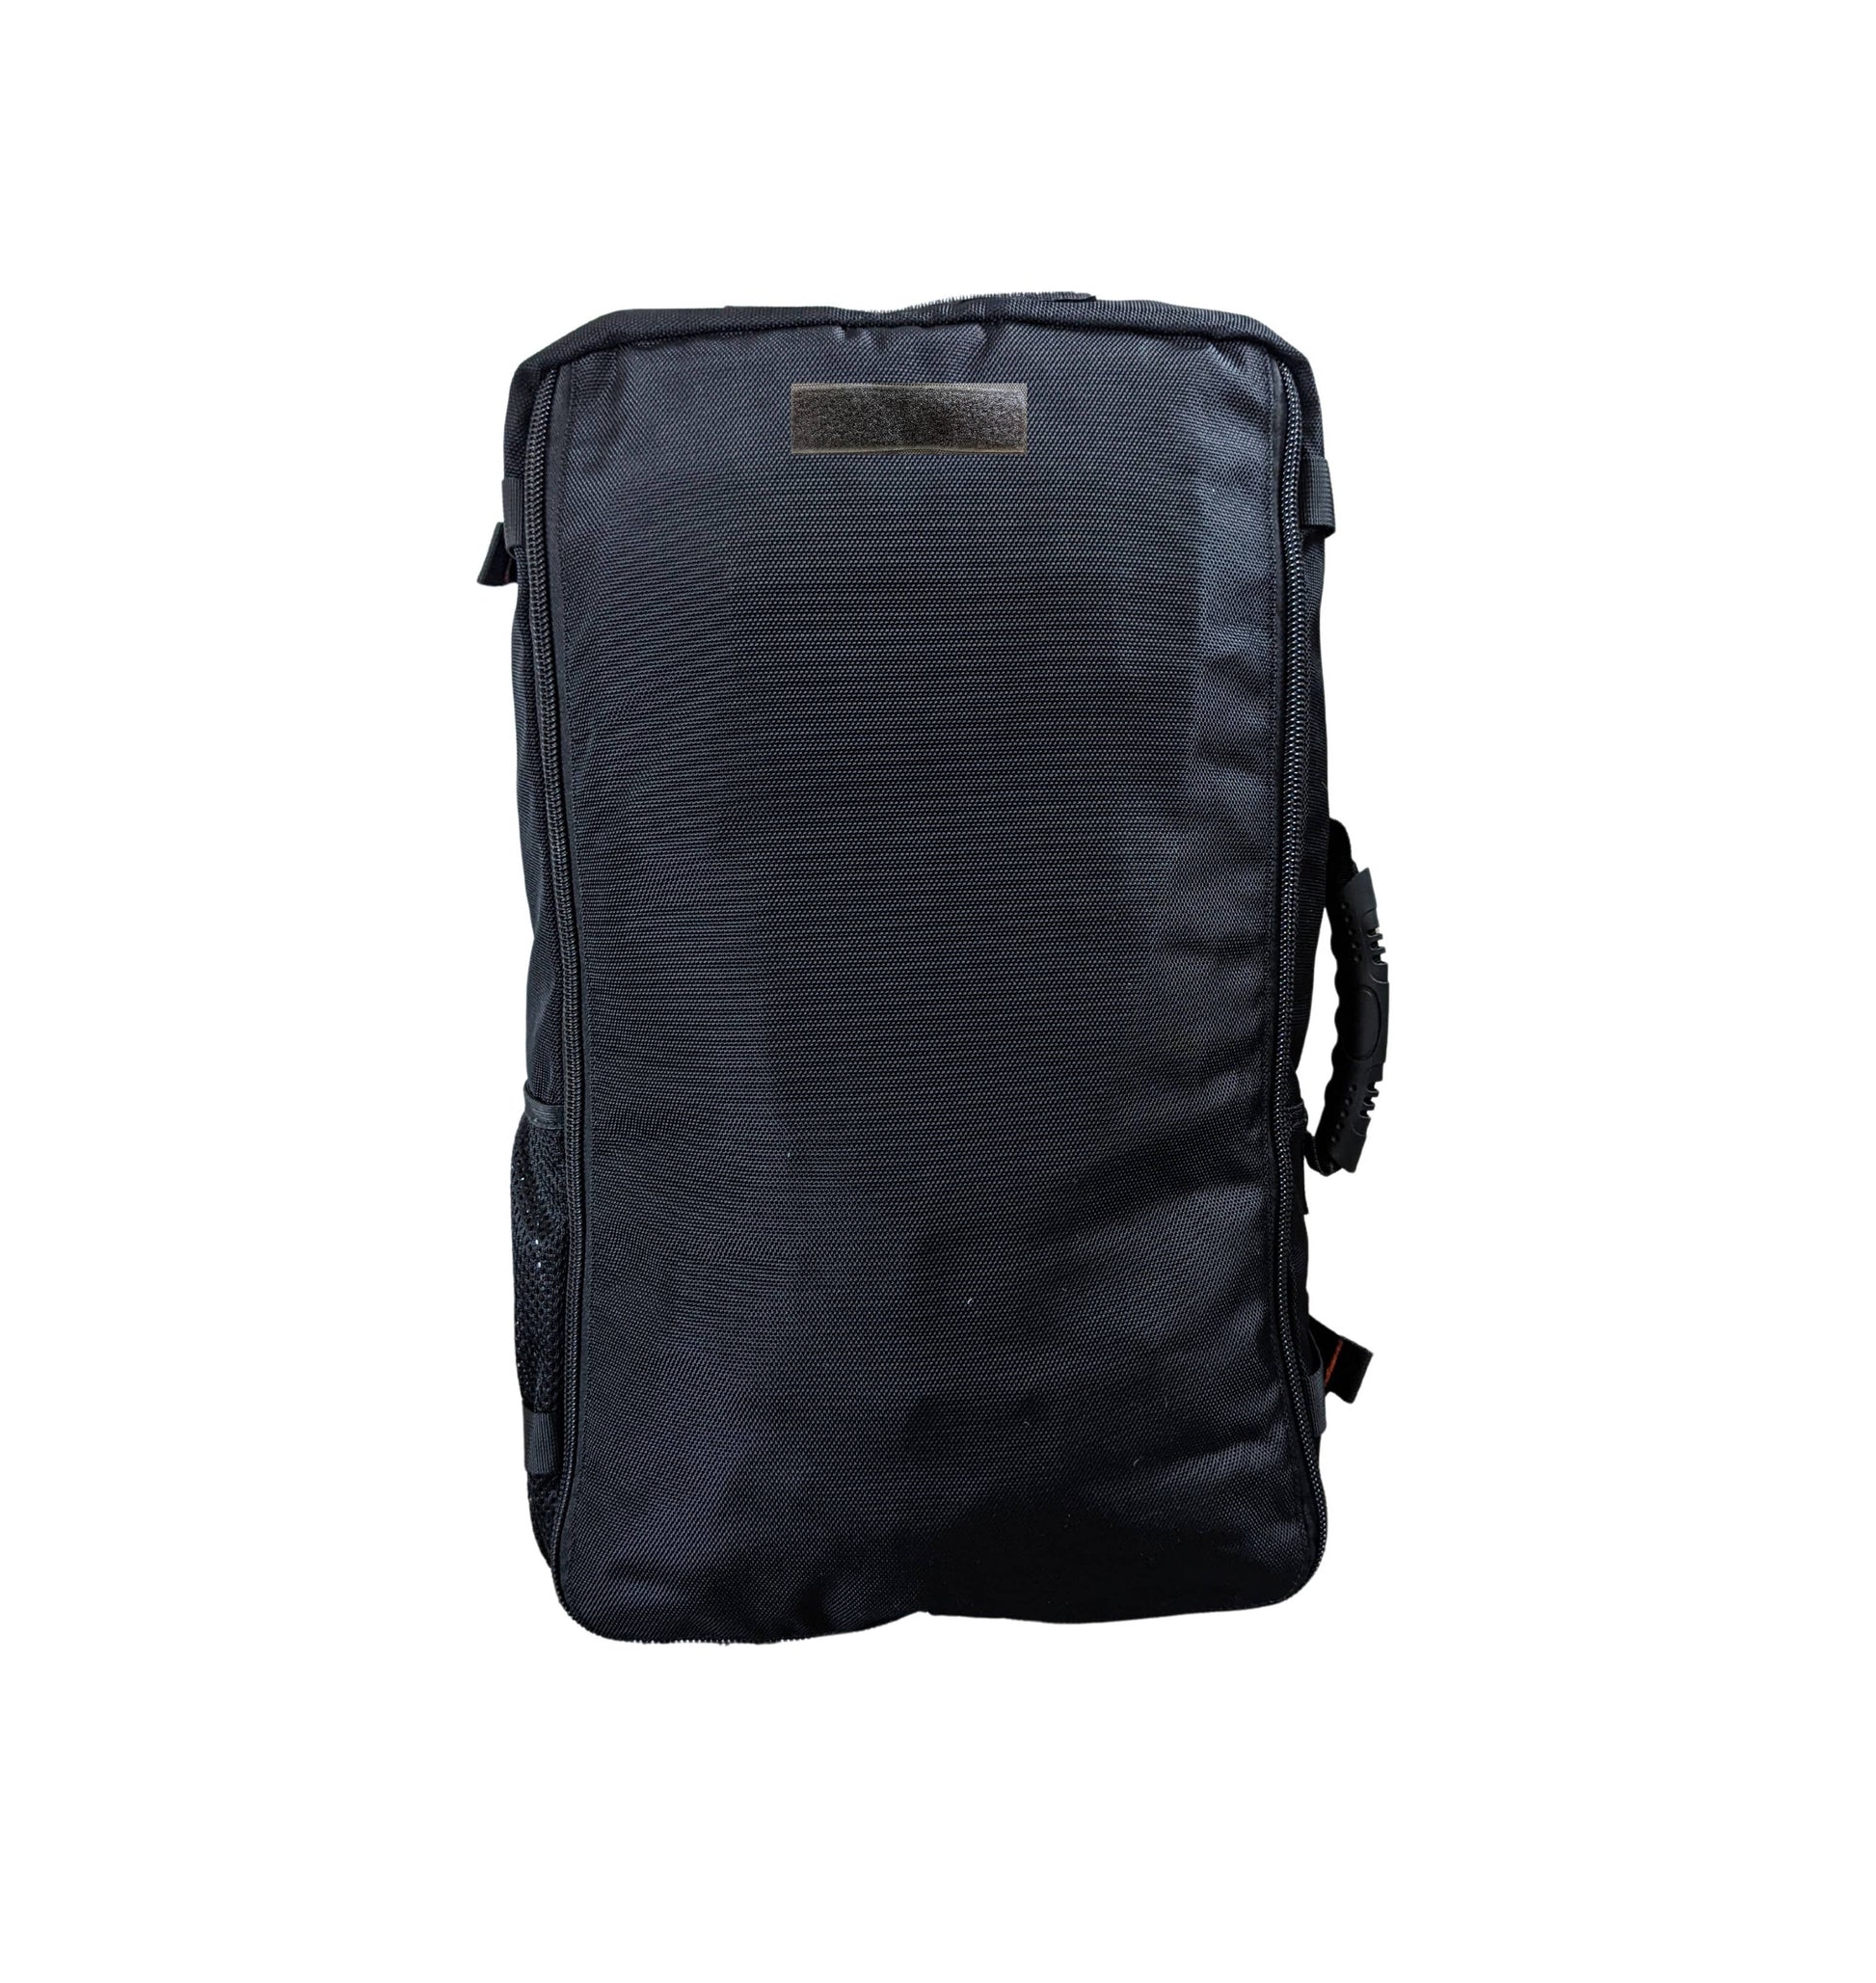 Backpack with straps stowed